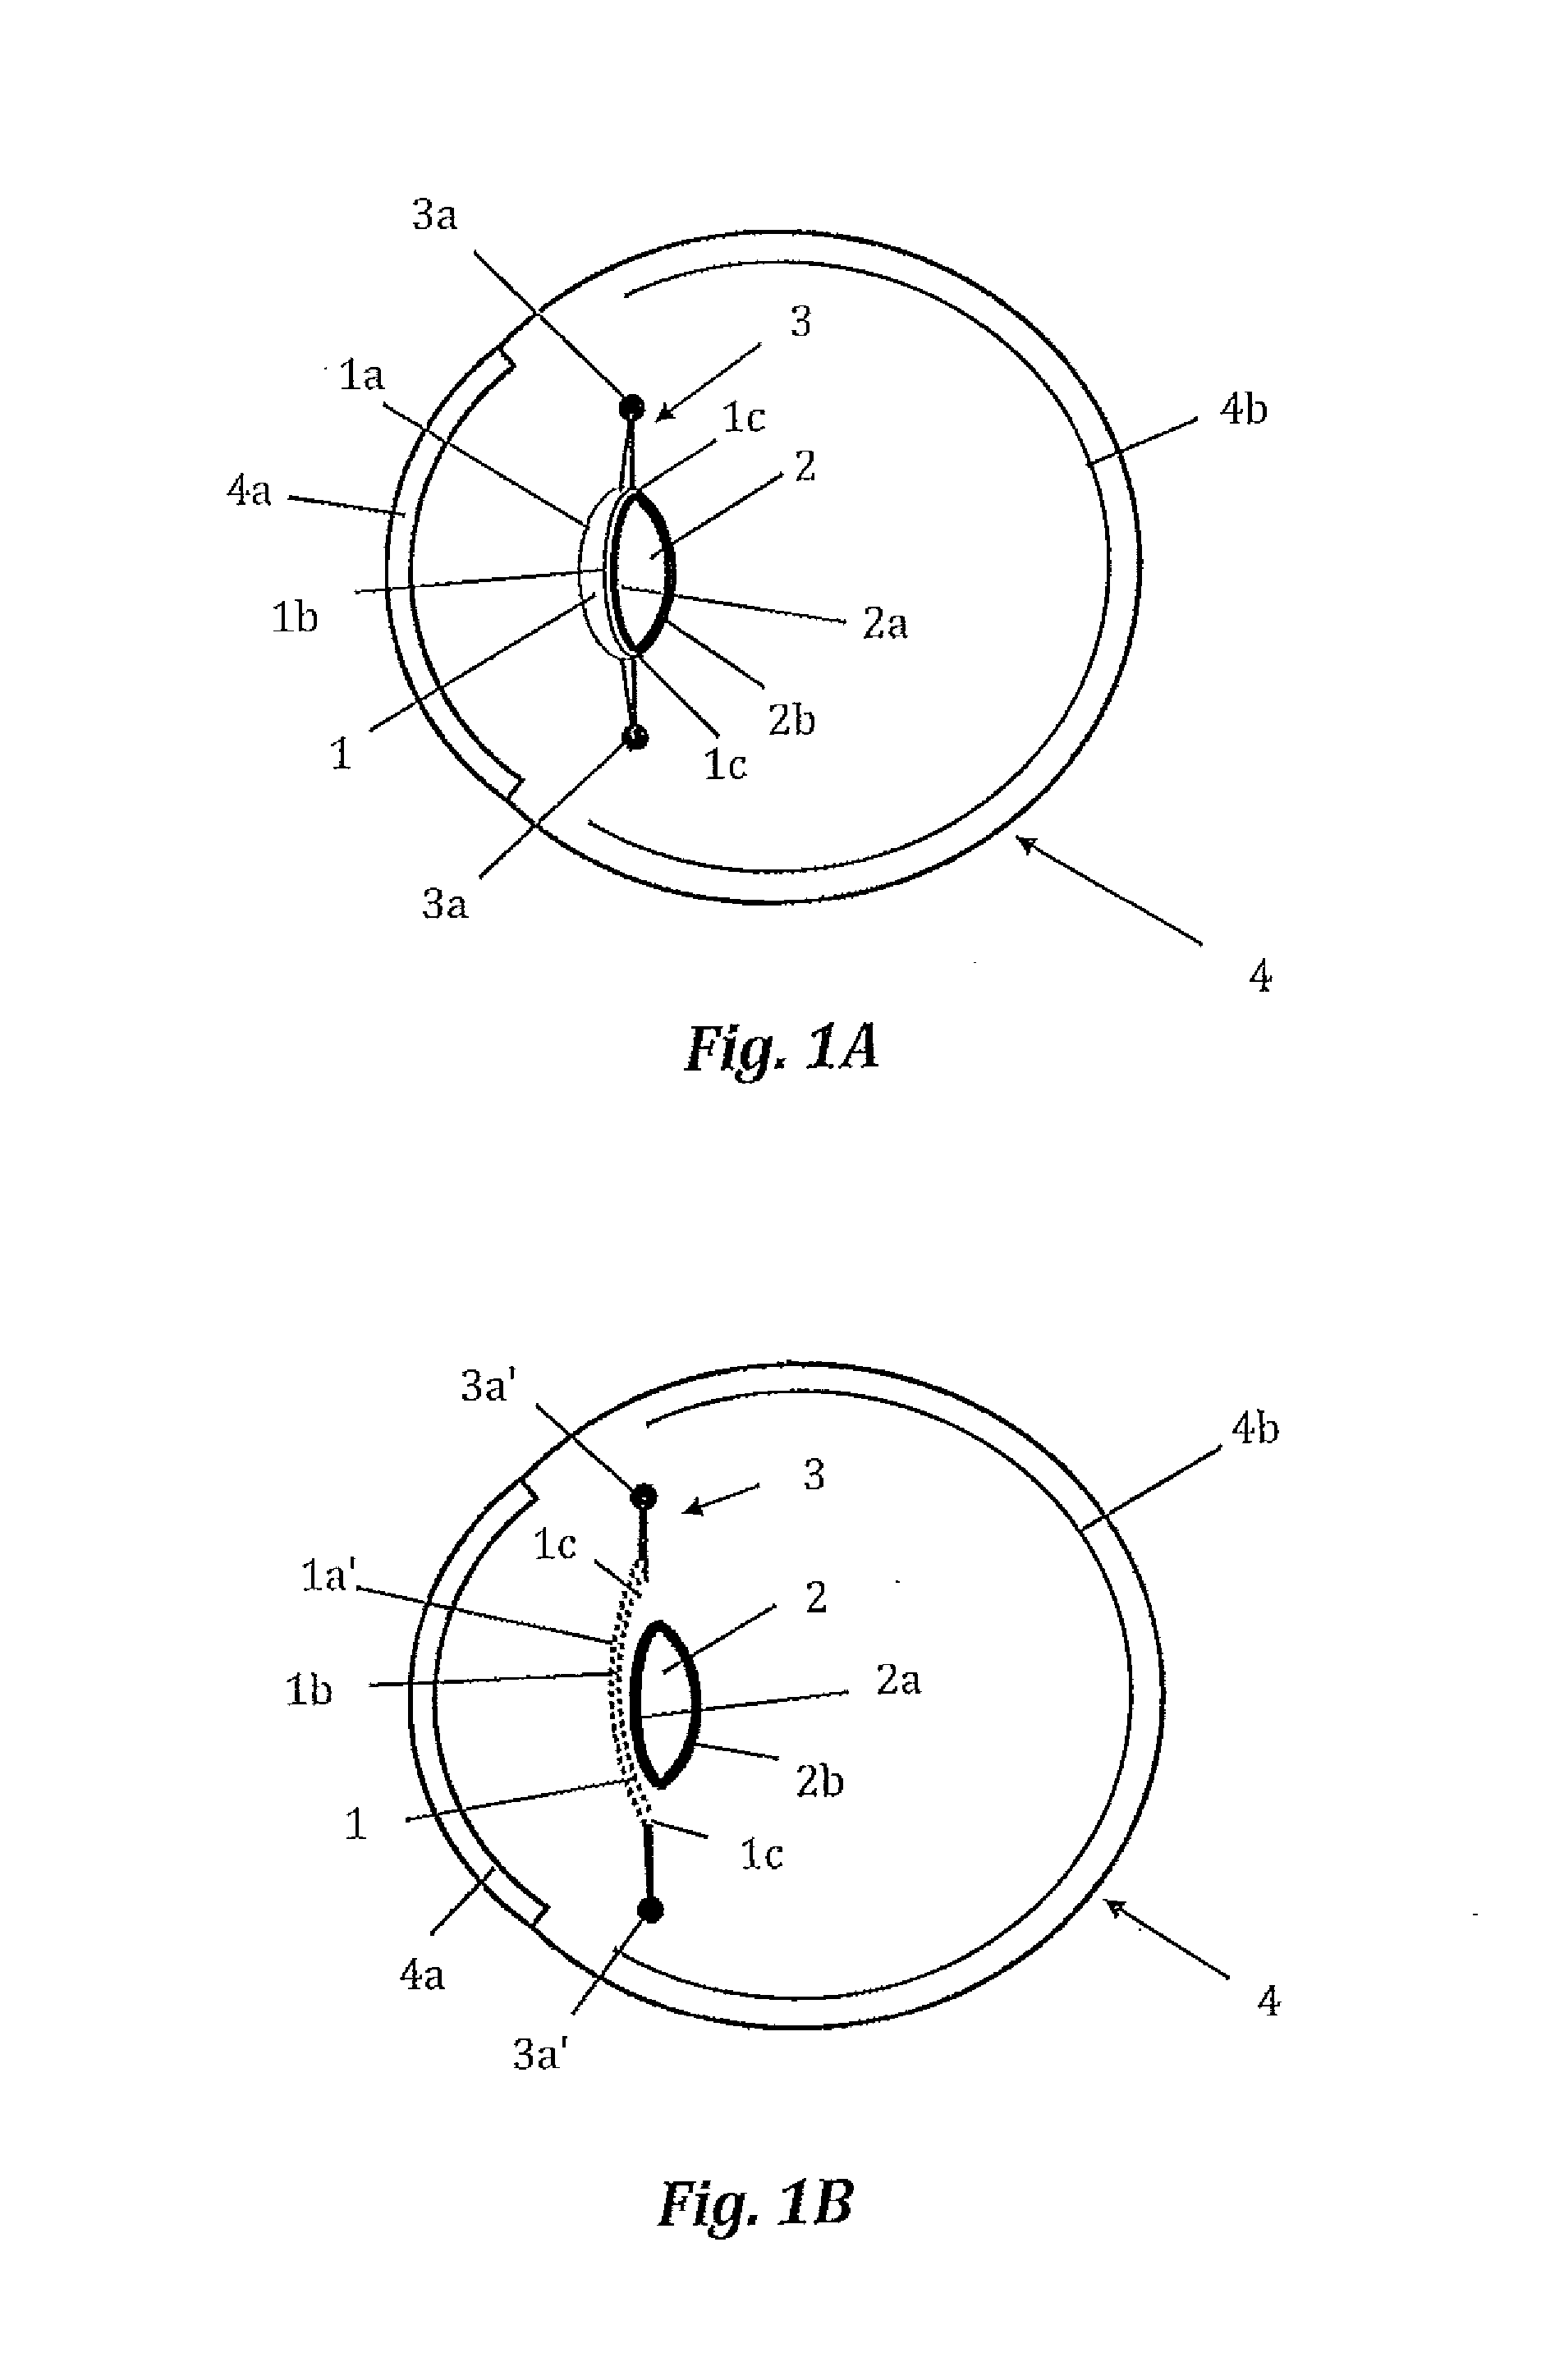 Intraocular lens with accommodation capacity